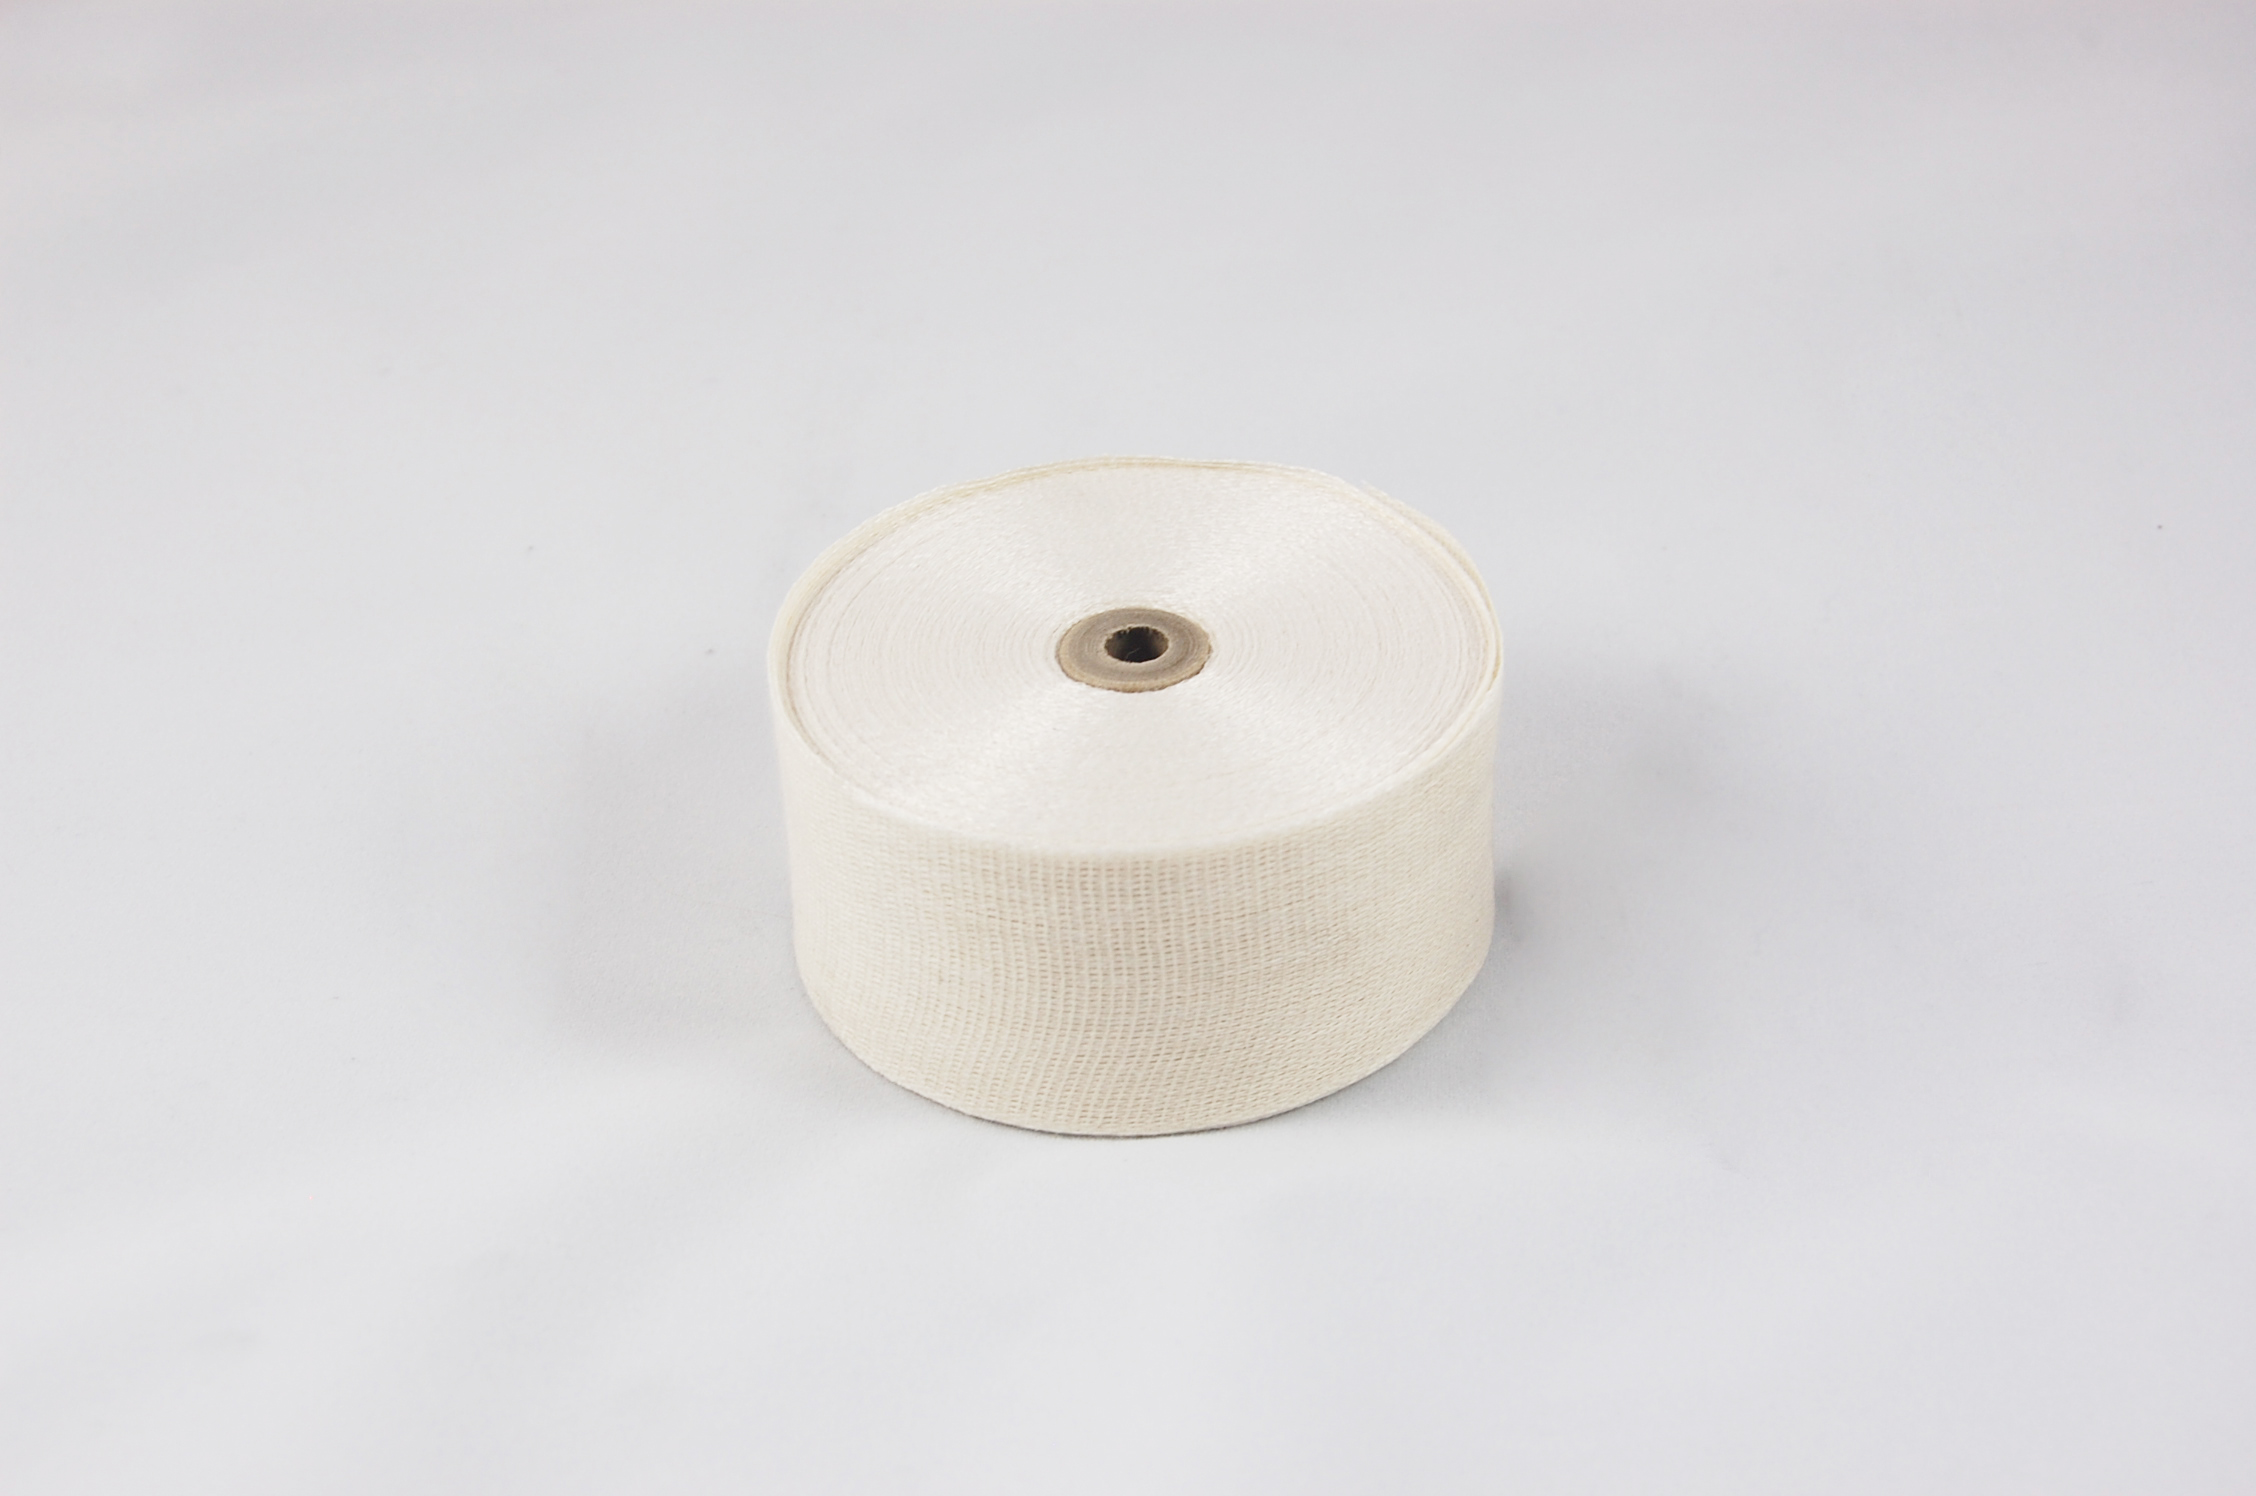 3/4" 6426-17 .007" Woven Cotton Tape (Lightweight) 105°C, natural, 3/4" wide x  36 YD roll